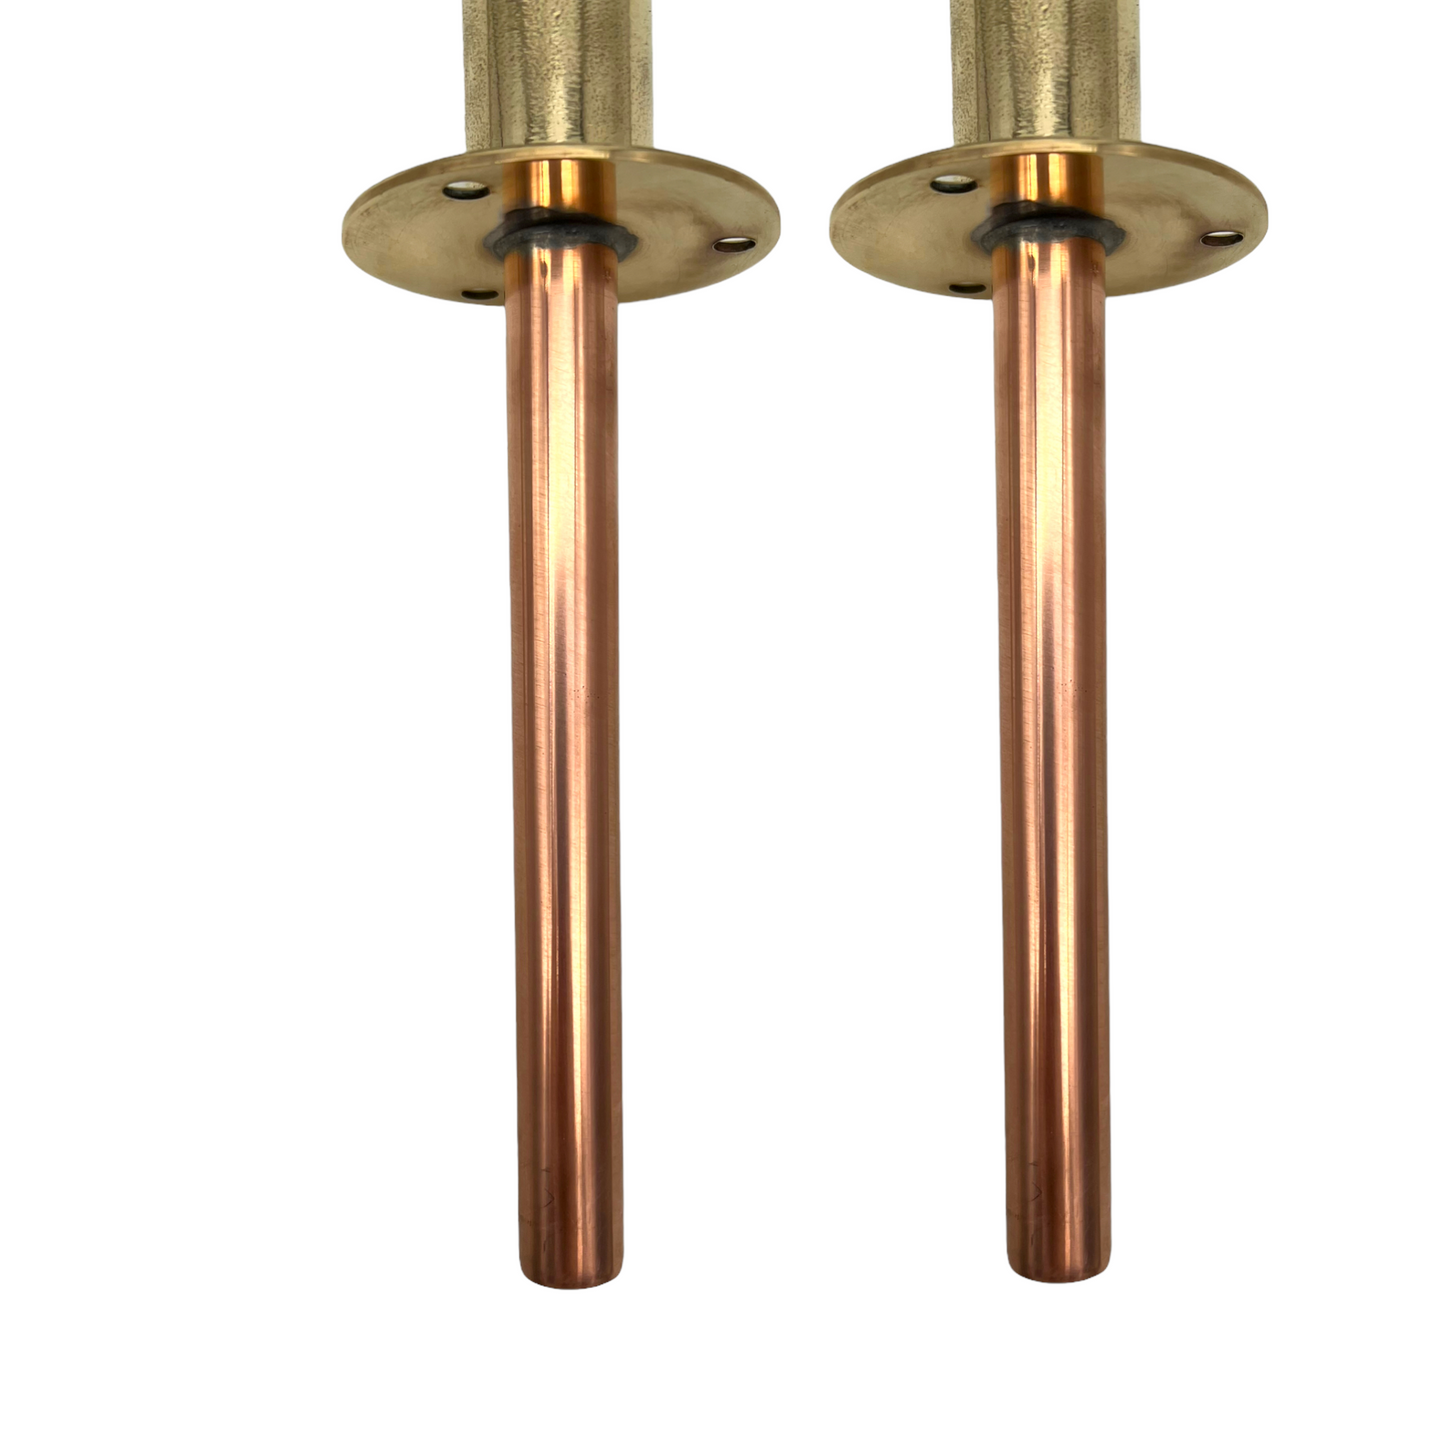 Stndanrd 15mm tail ends of Copper and brass handmade vintage style taps sold by All Things French Store